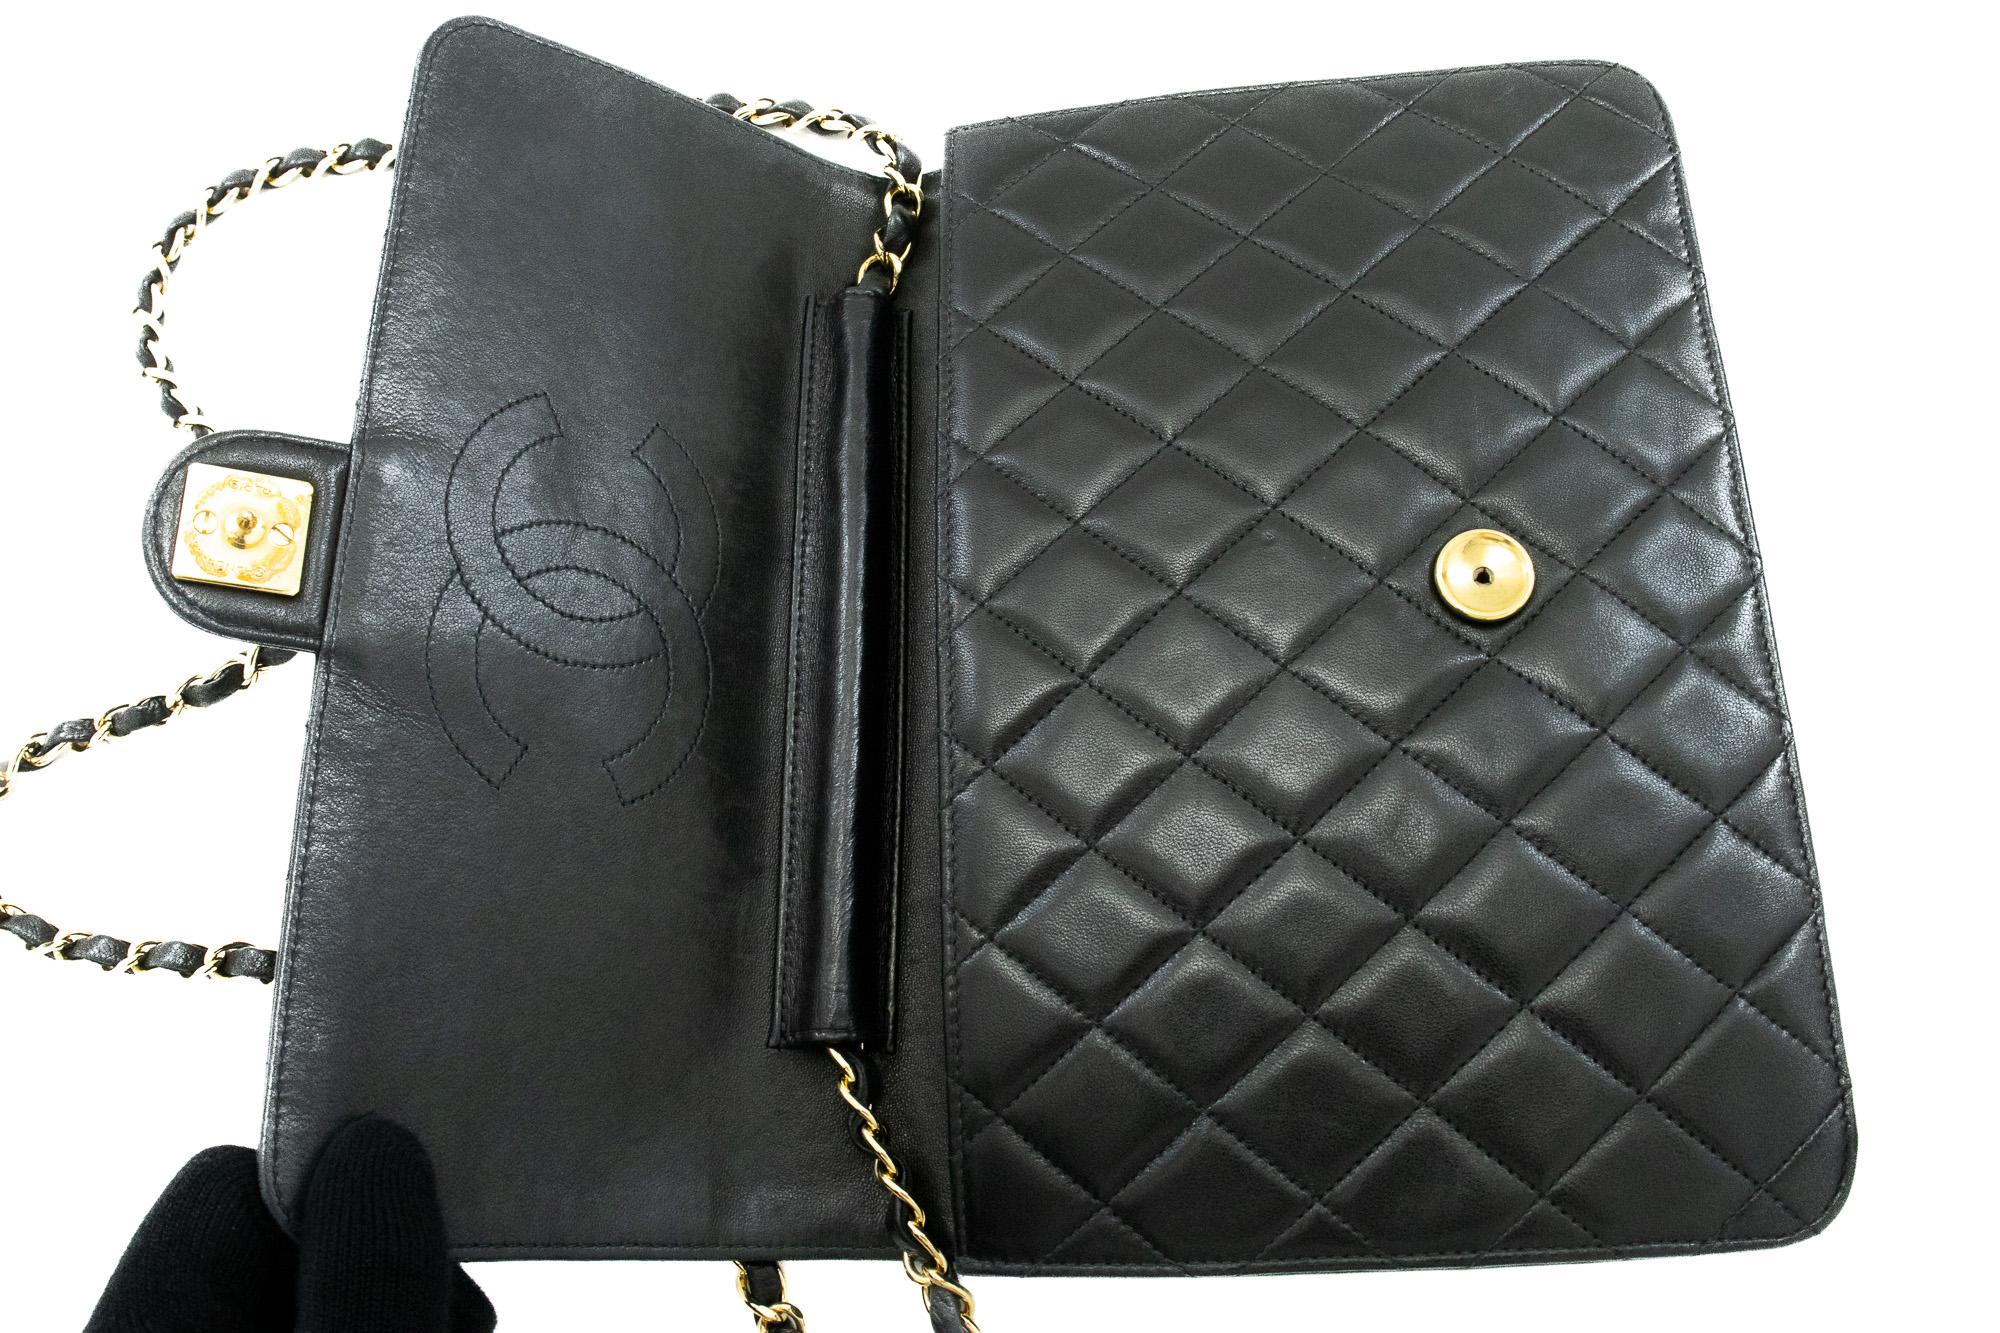 CHANEL Chain Shoulder Bag Black Clutch Flap Quilted Purse Lambskin 4